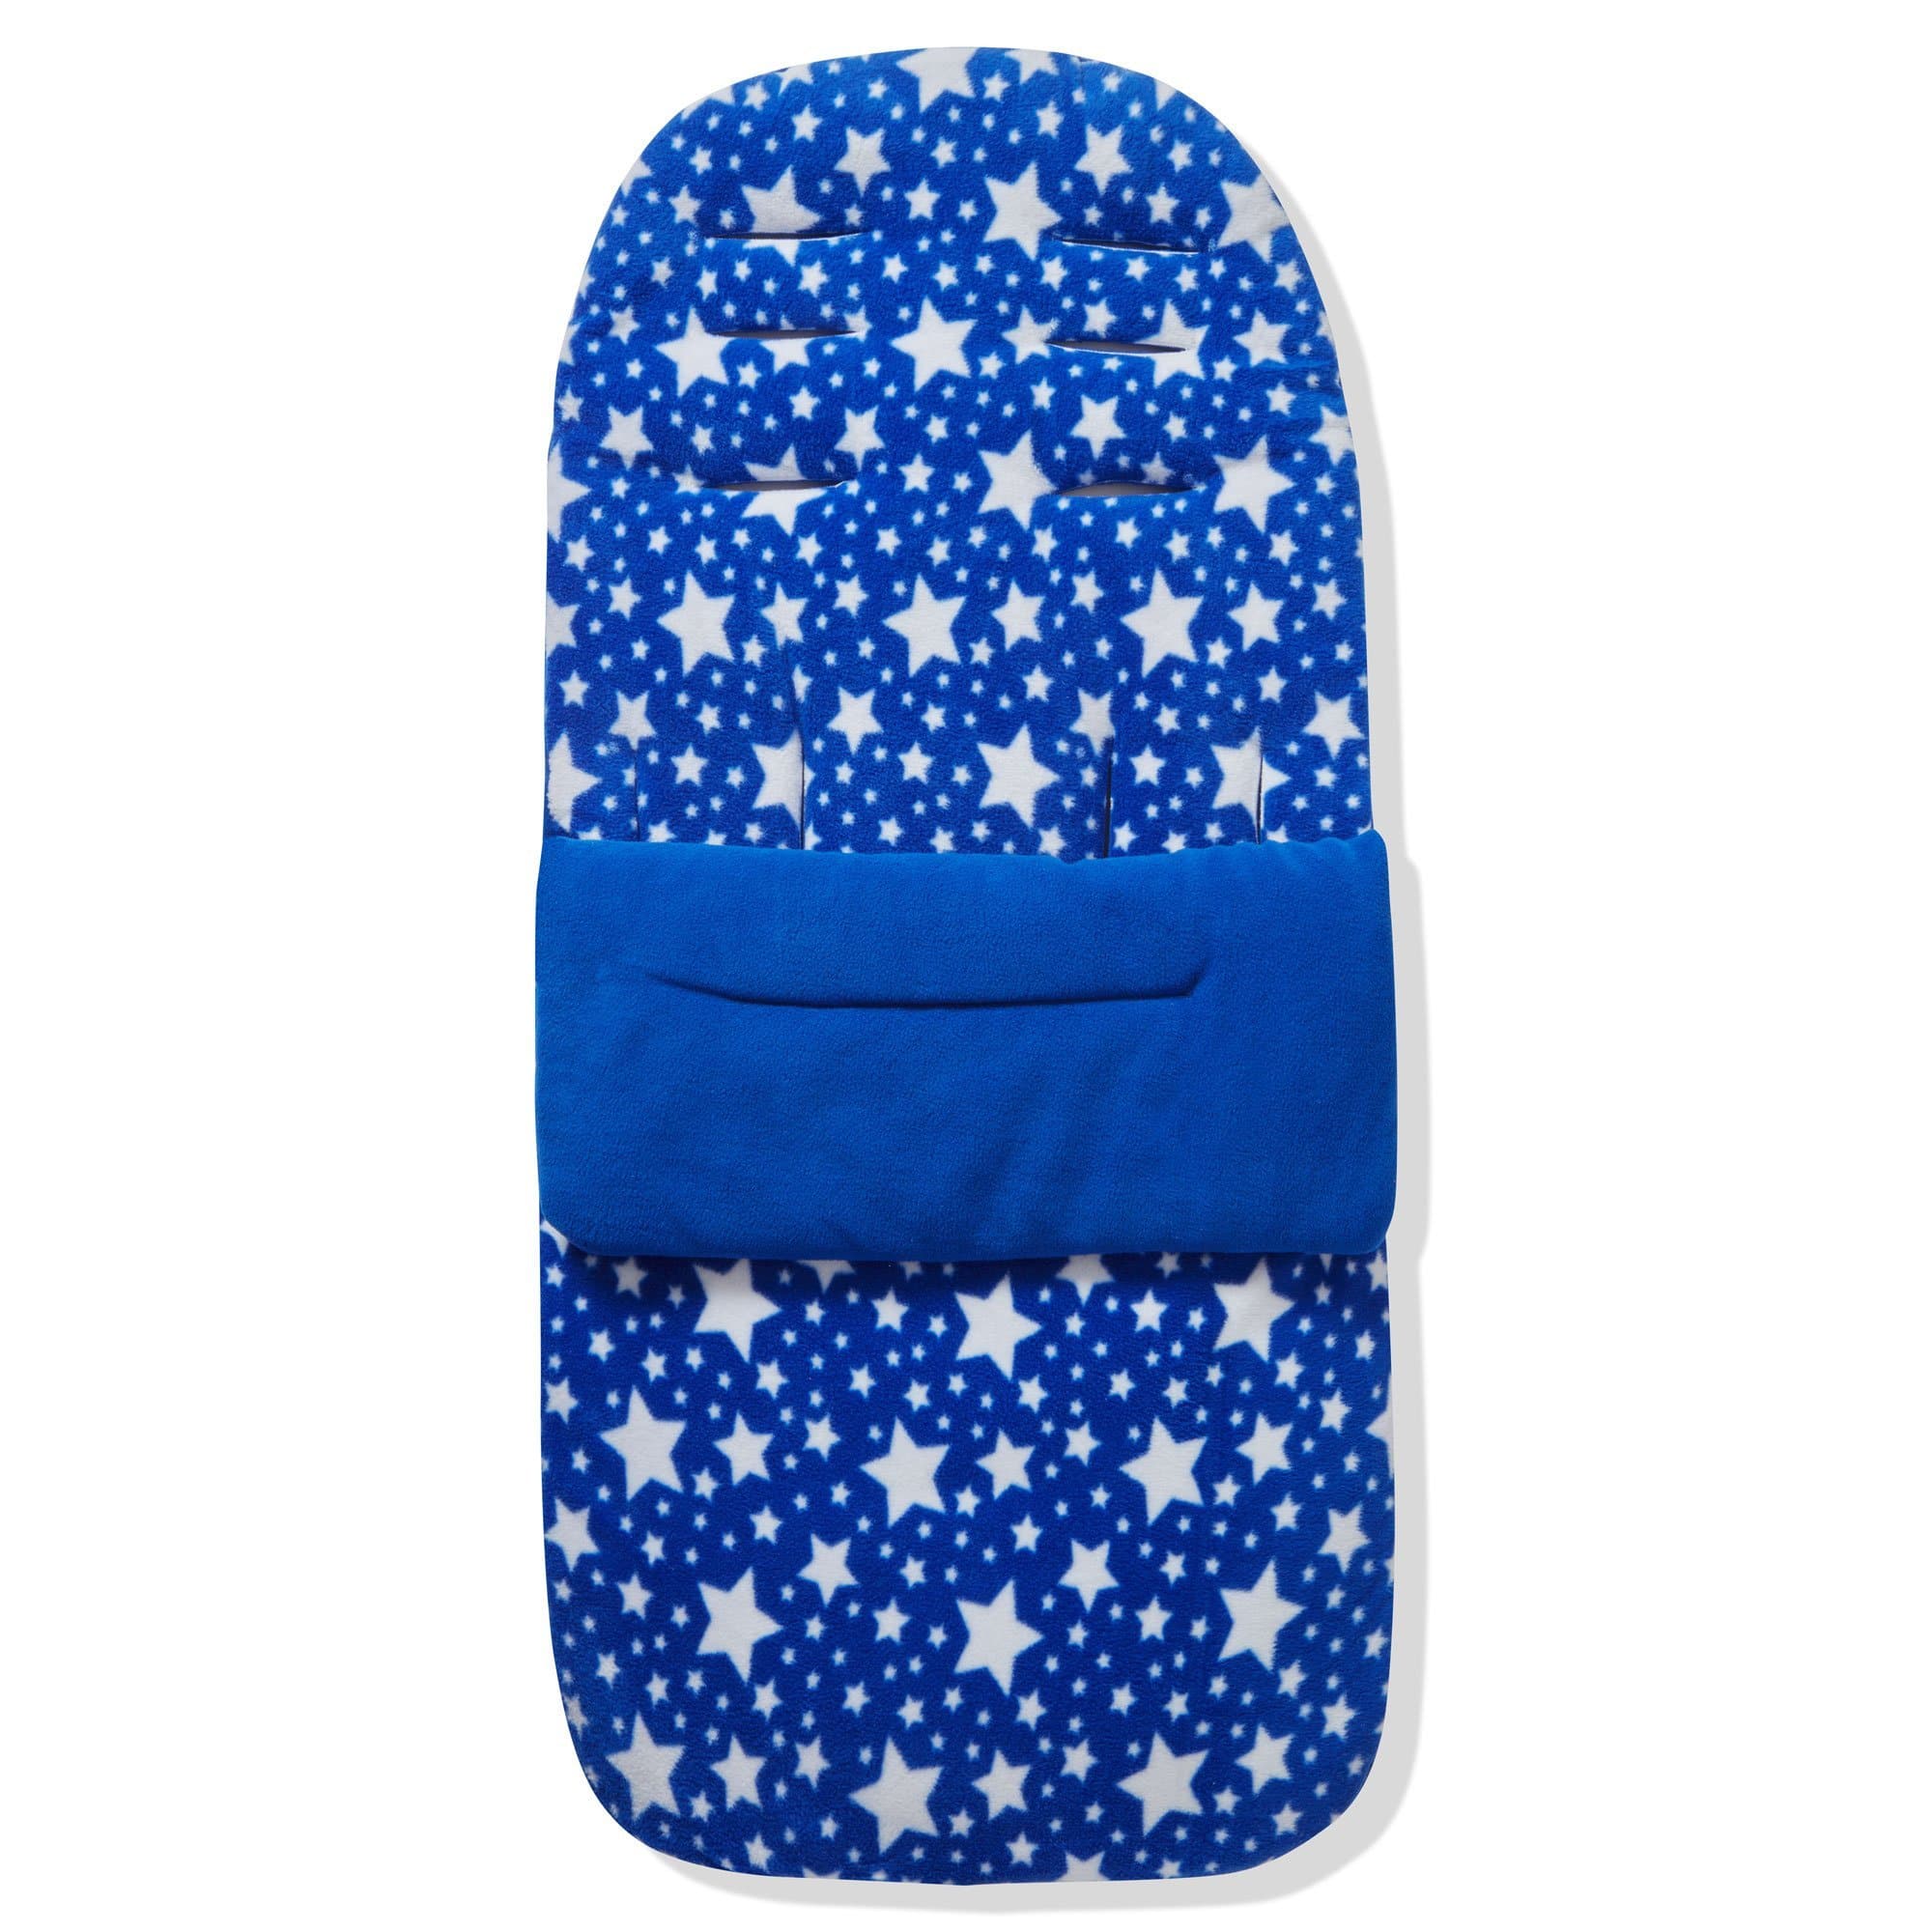 Fleece Footmuff / Cosy Toes Compatible with Excel - Blue Star / Fits All Models | For Your Little One